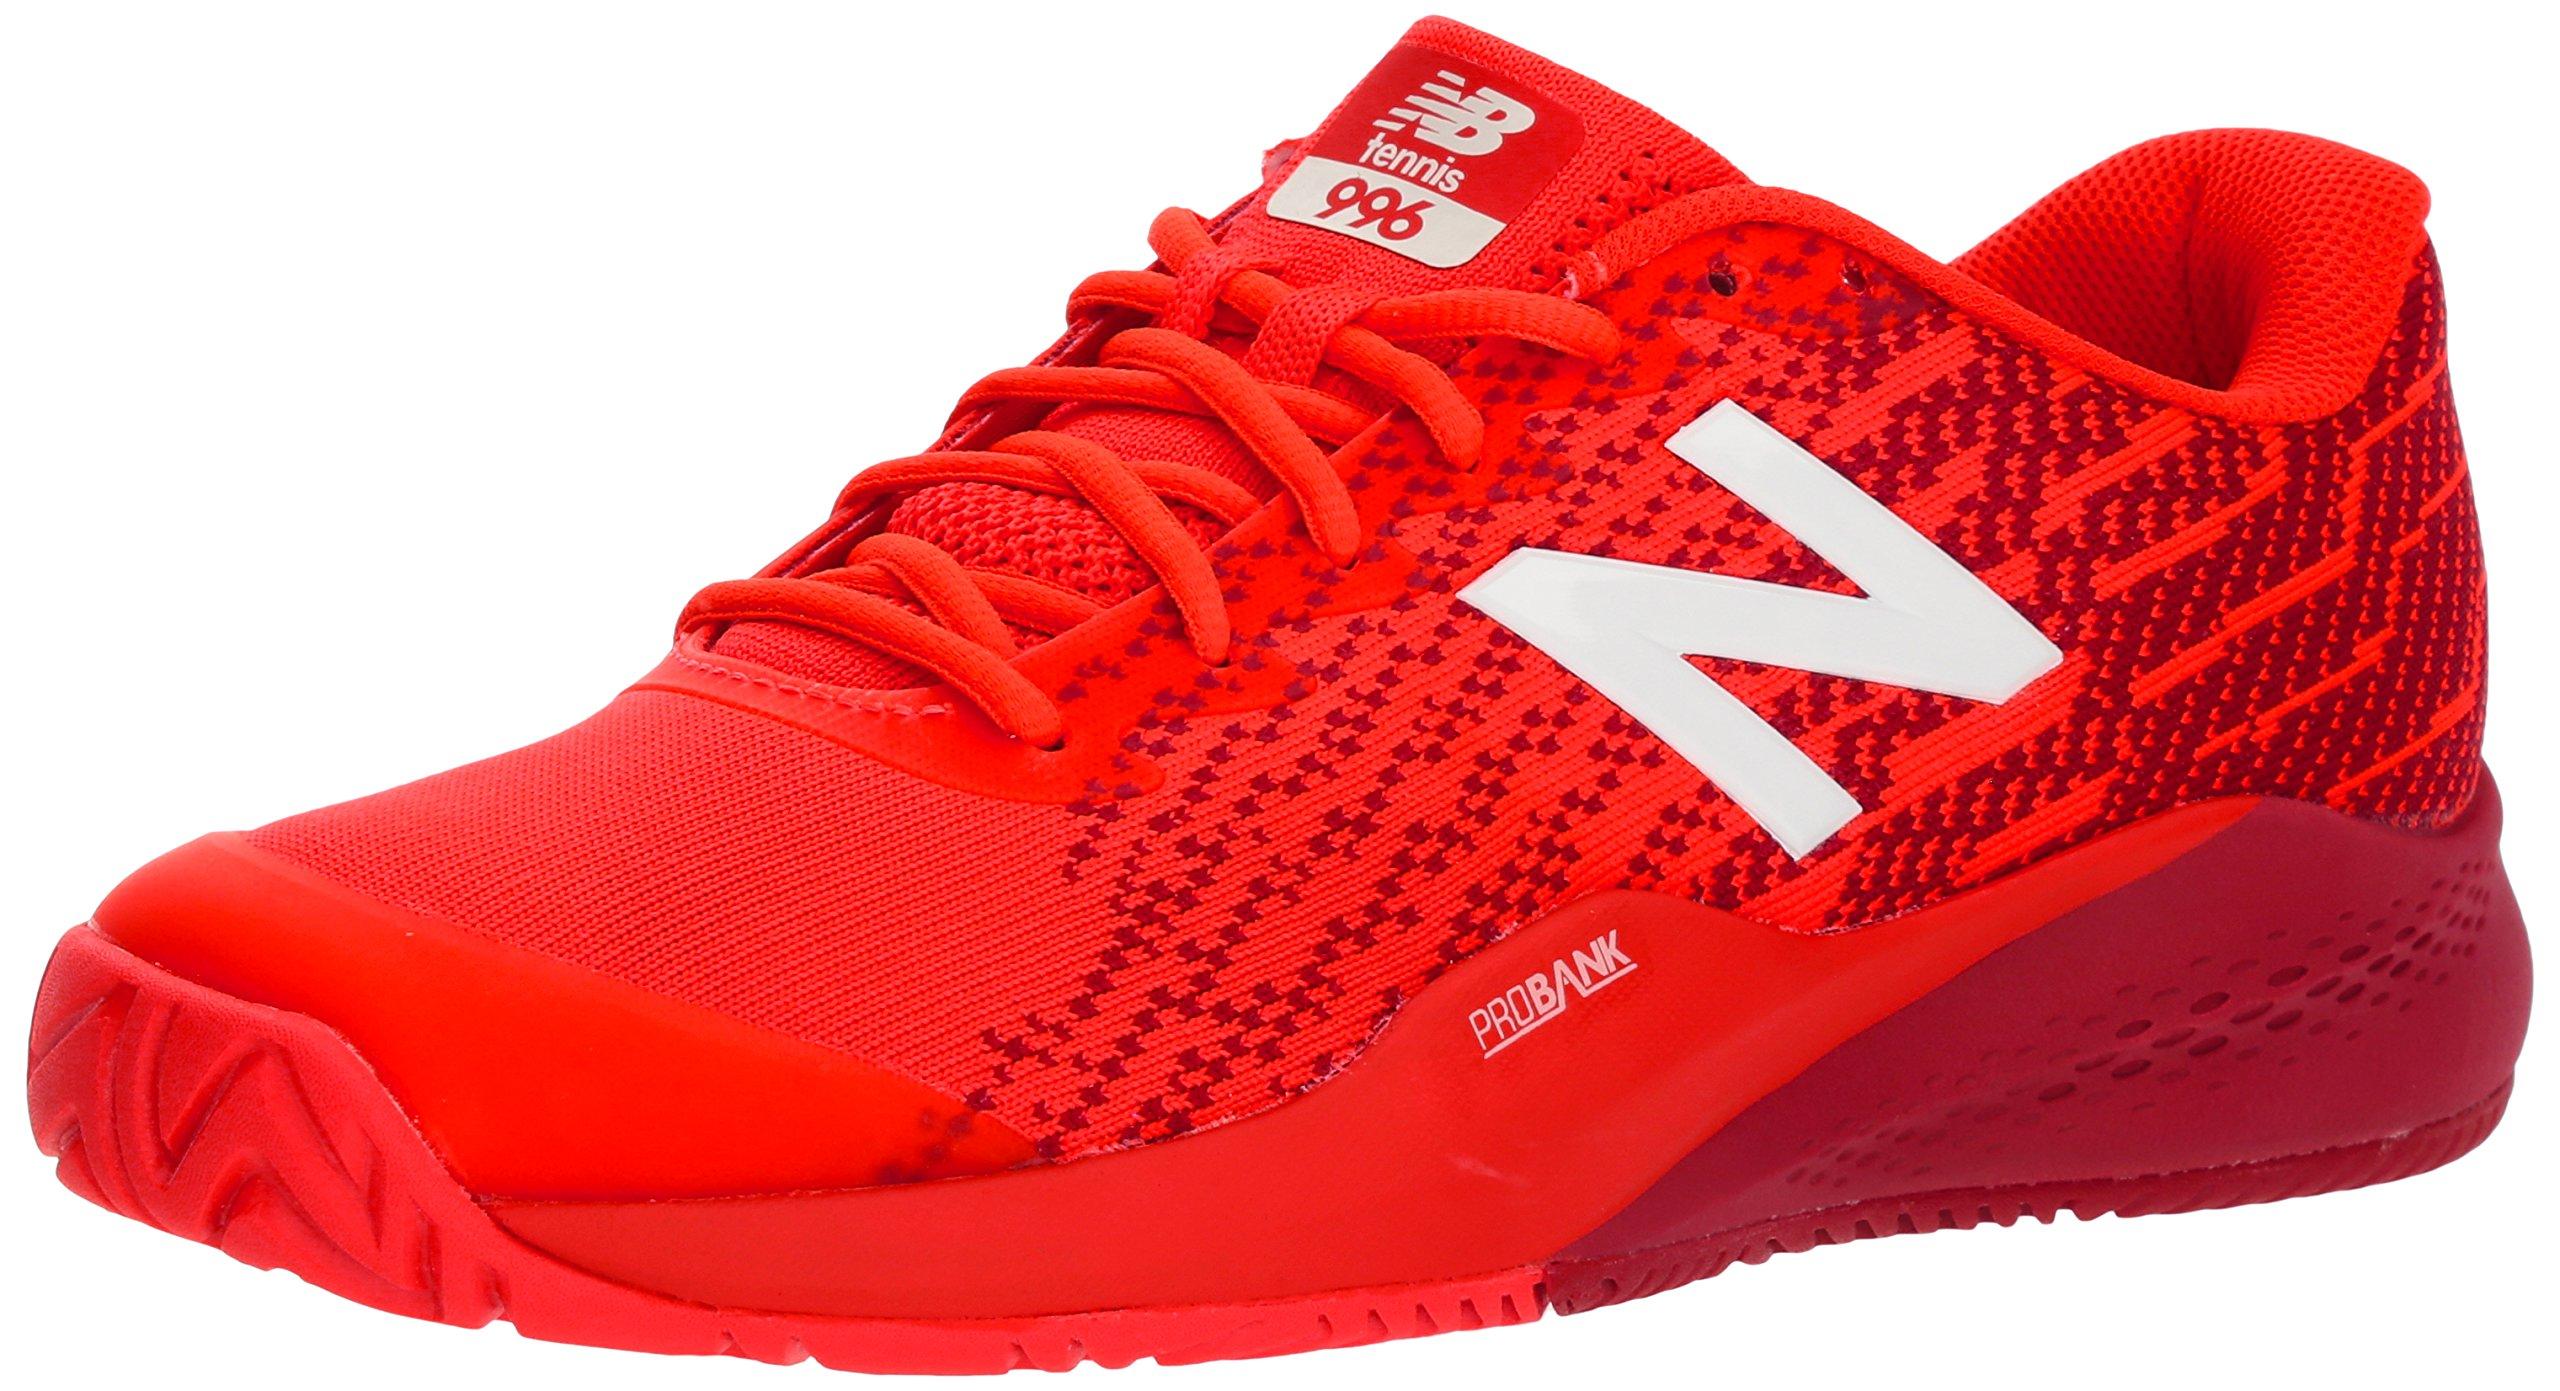 New Balance 996v3 Clay Clay Tennis Shoe Red | Lyst